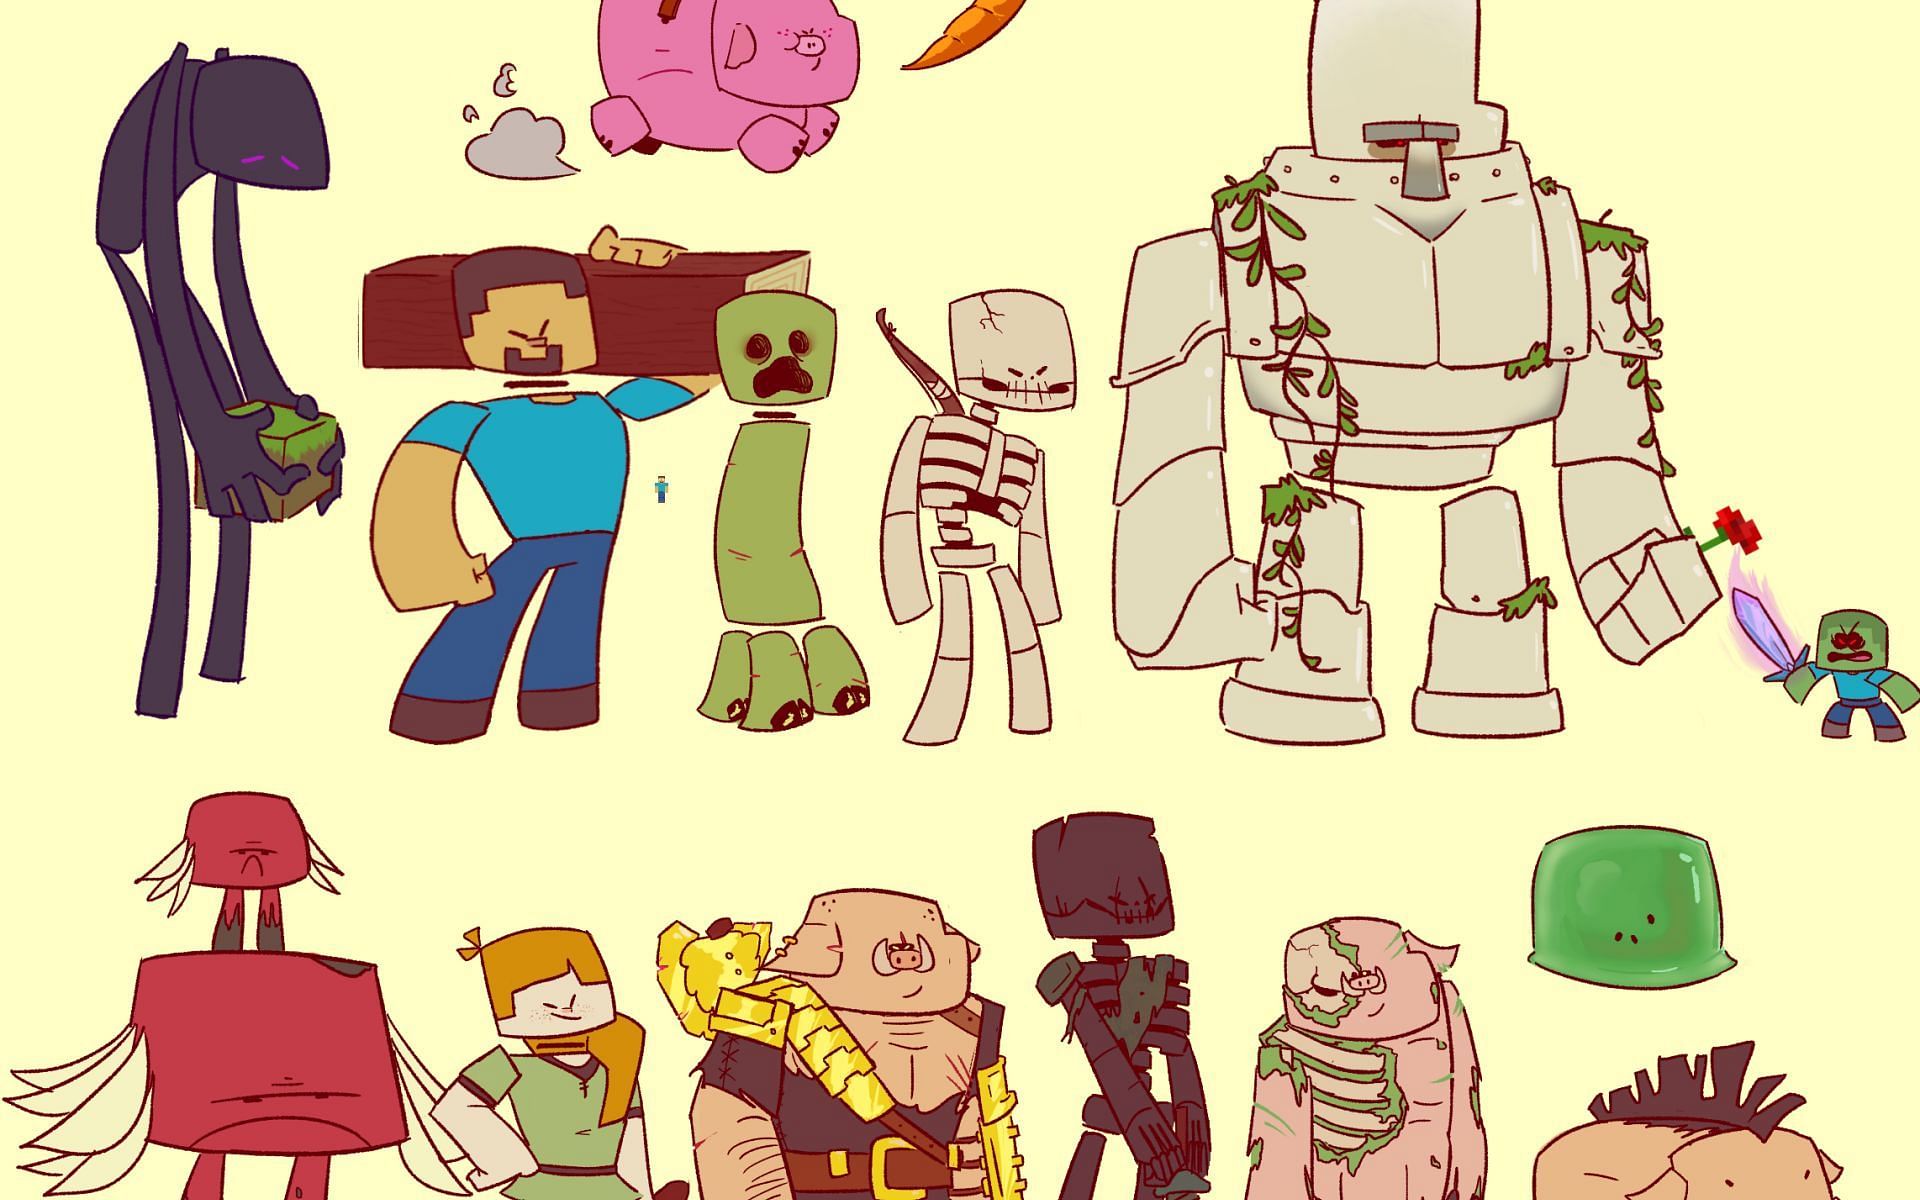 Several Minecraft characters and mobs drawn in a unique style (Image via u/pepo-pepito Reddit)